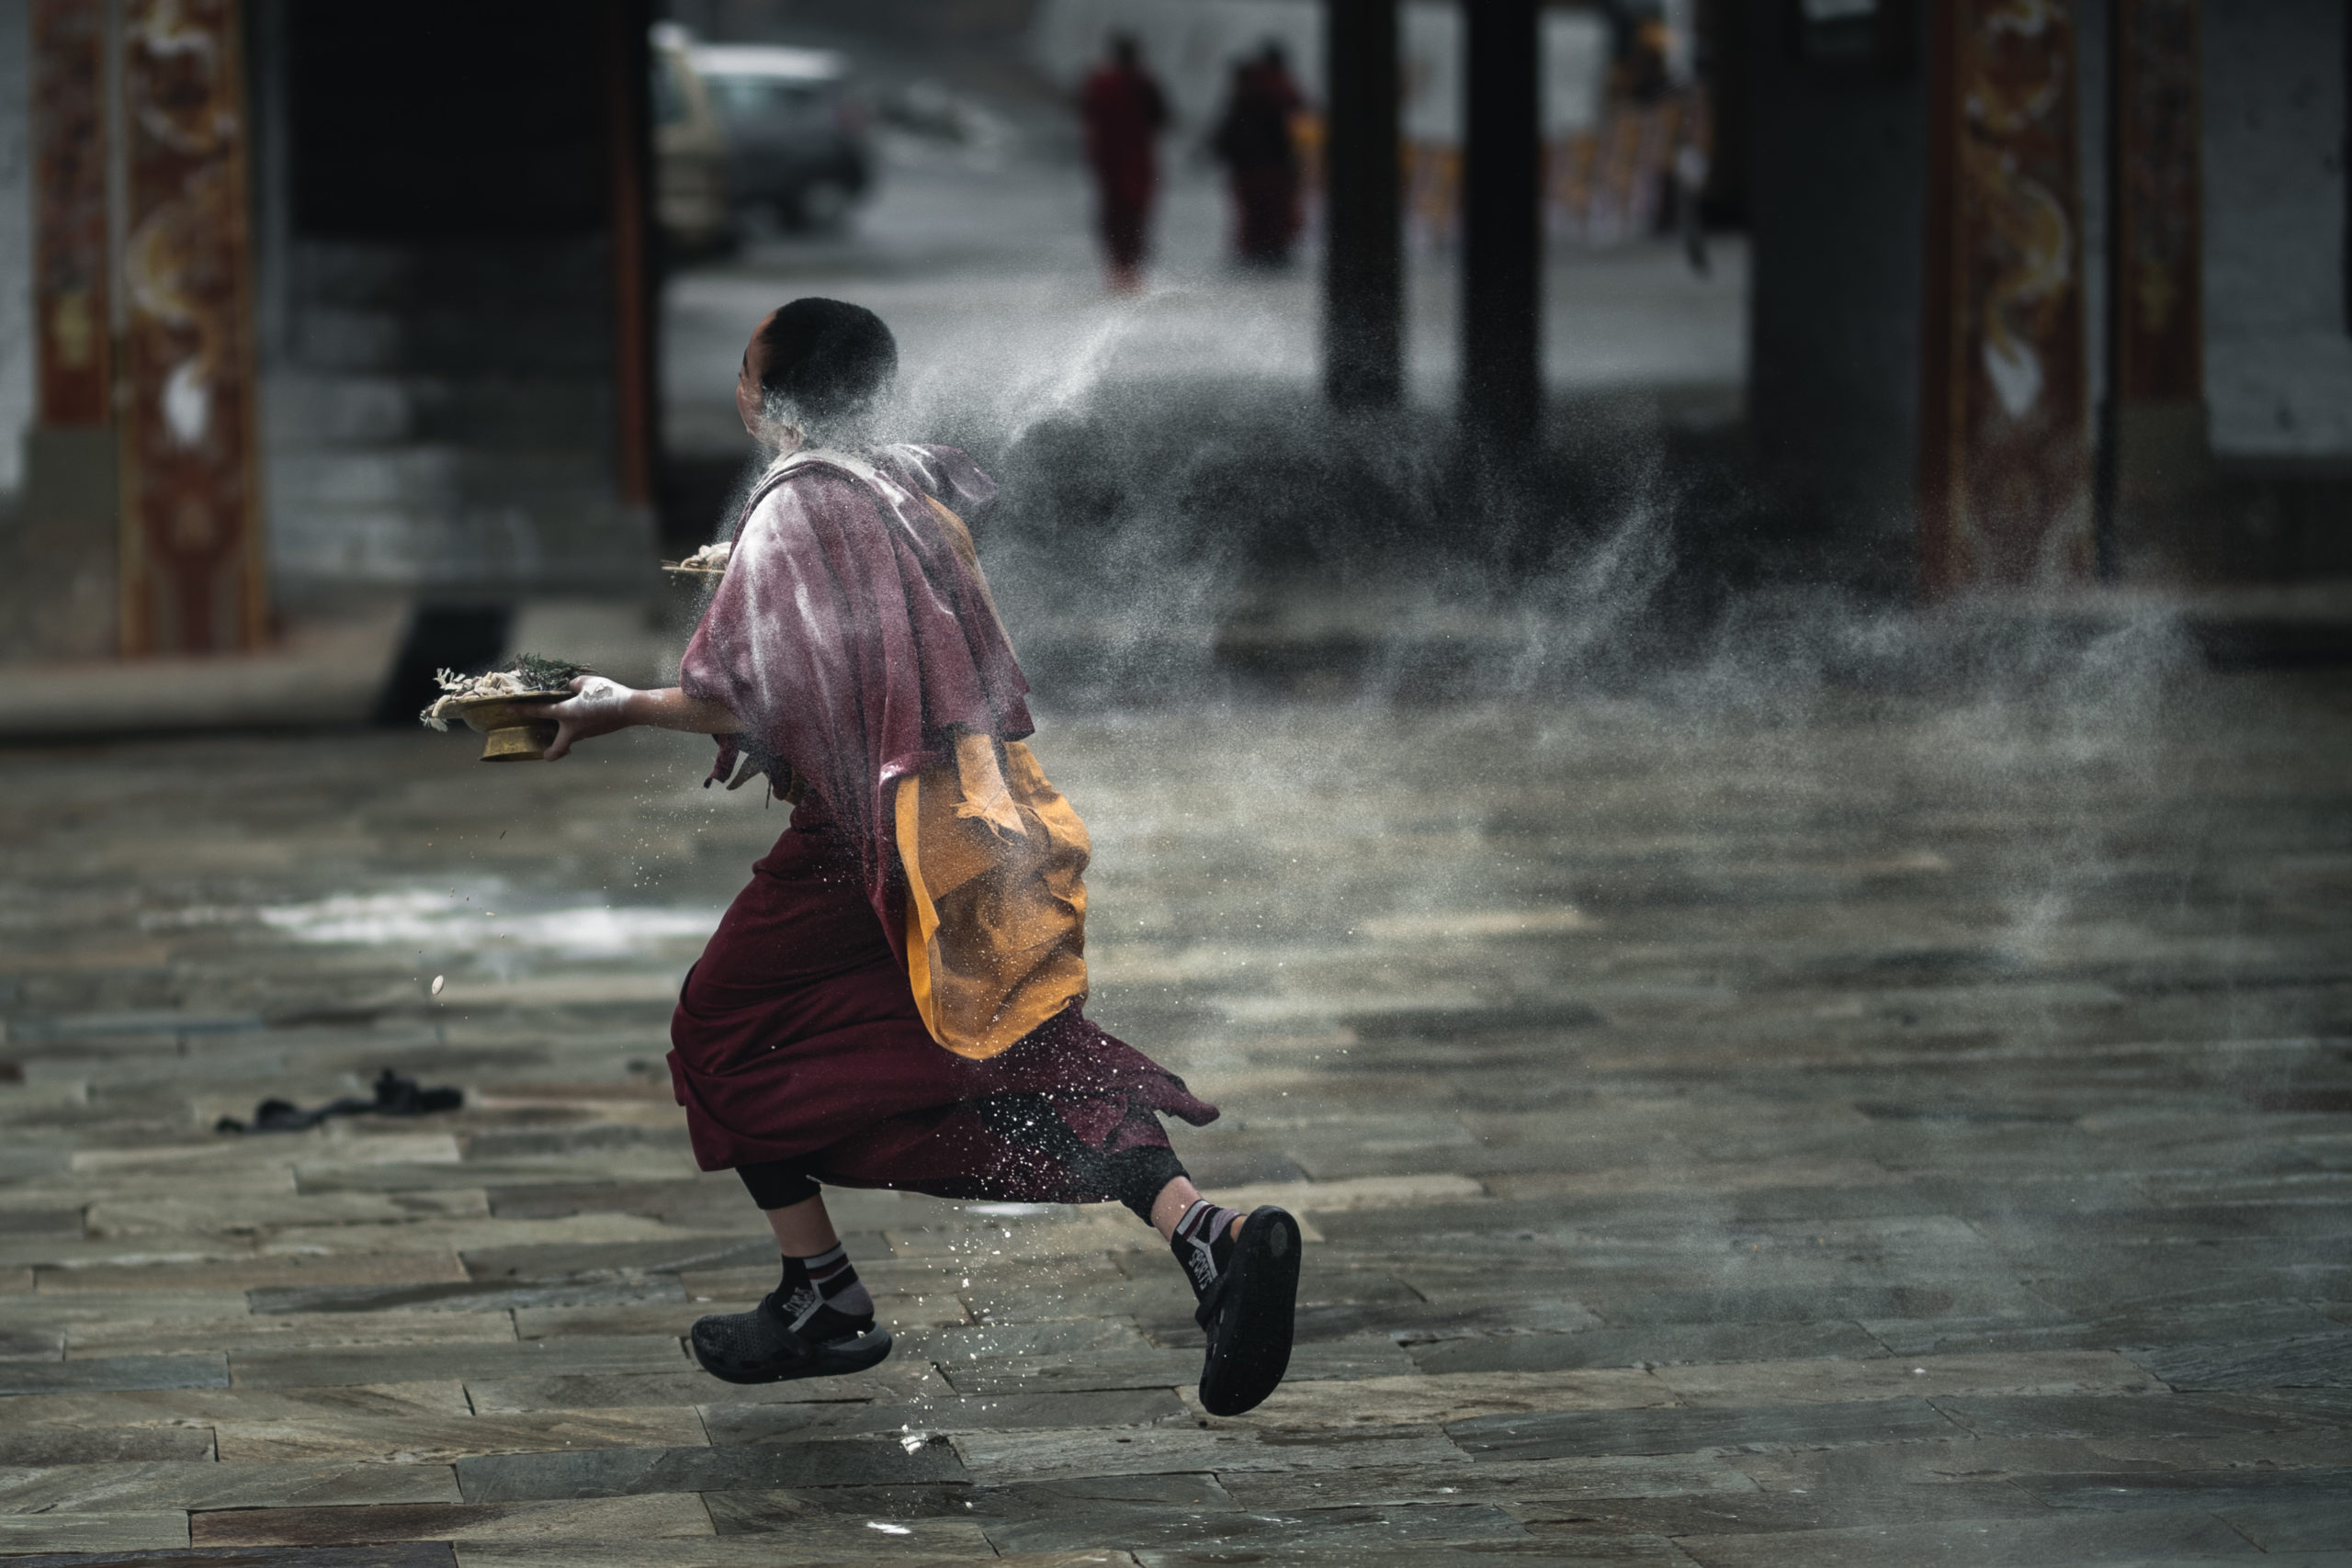 Photography of young Buddhist monks celebrating the Bhutanese New Year (Losar festival) by throwing powder and flour at each other at a monastery in Bumthang